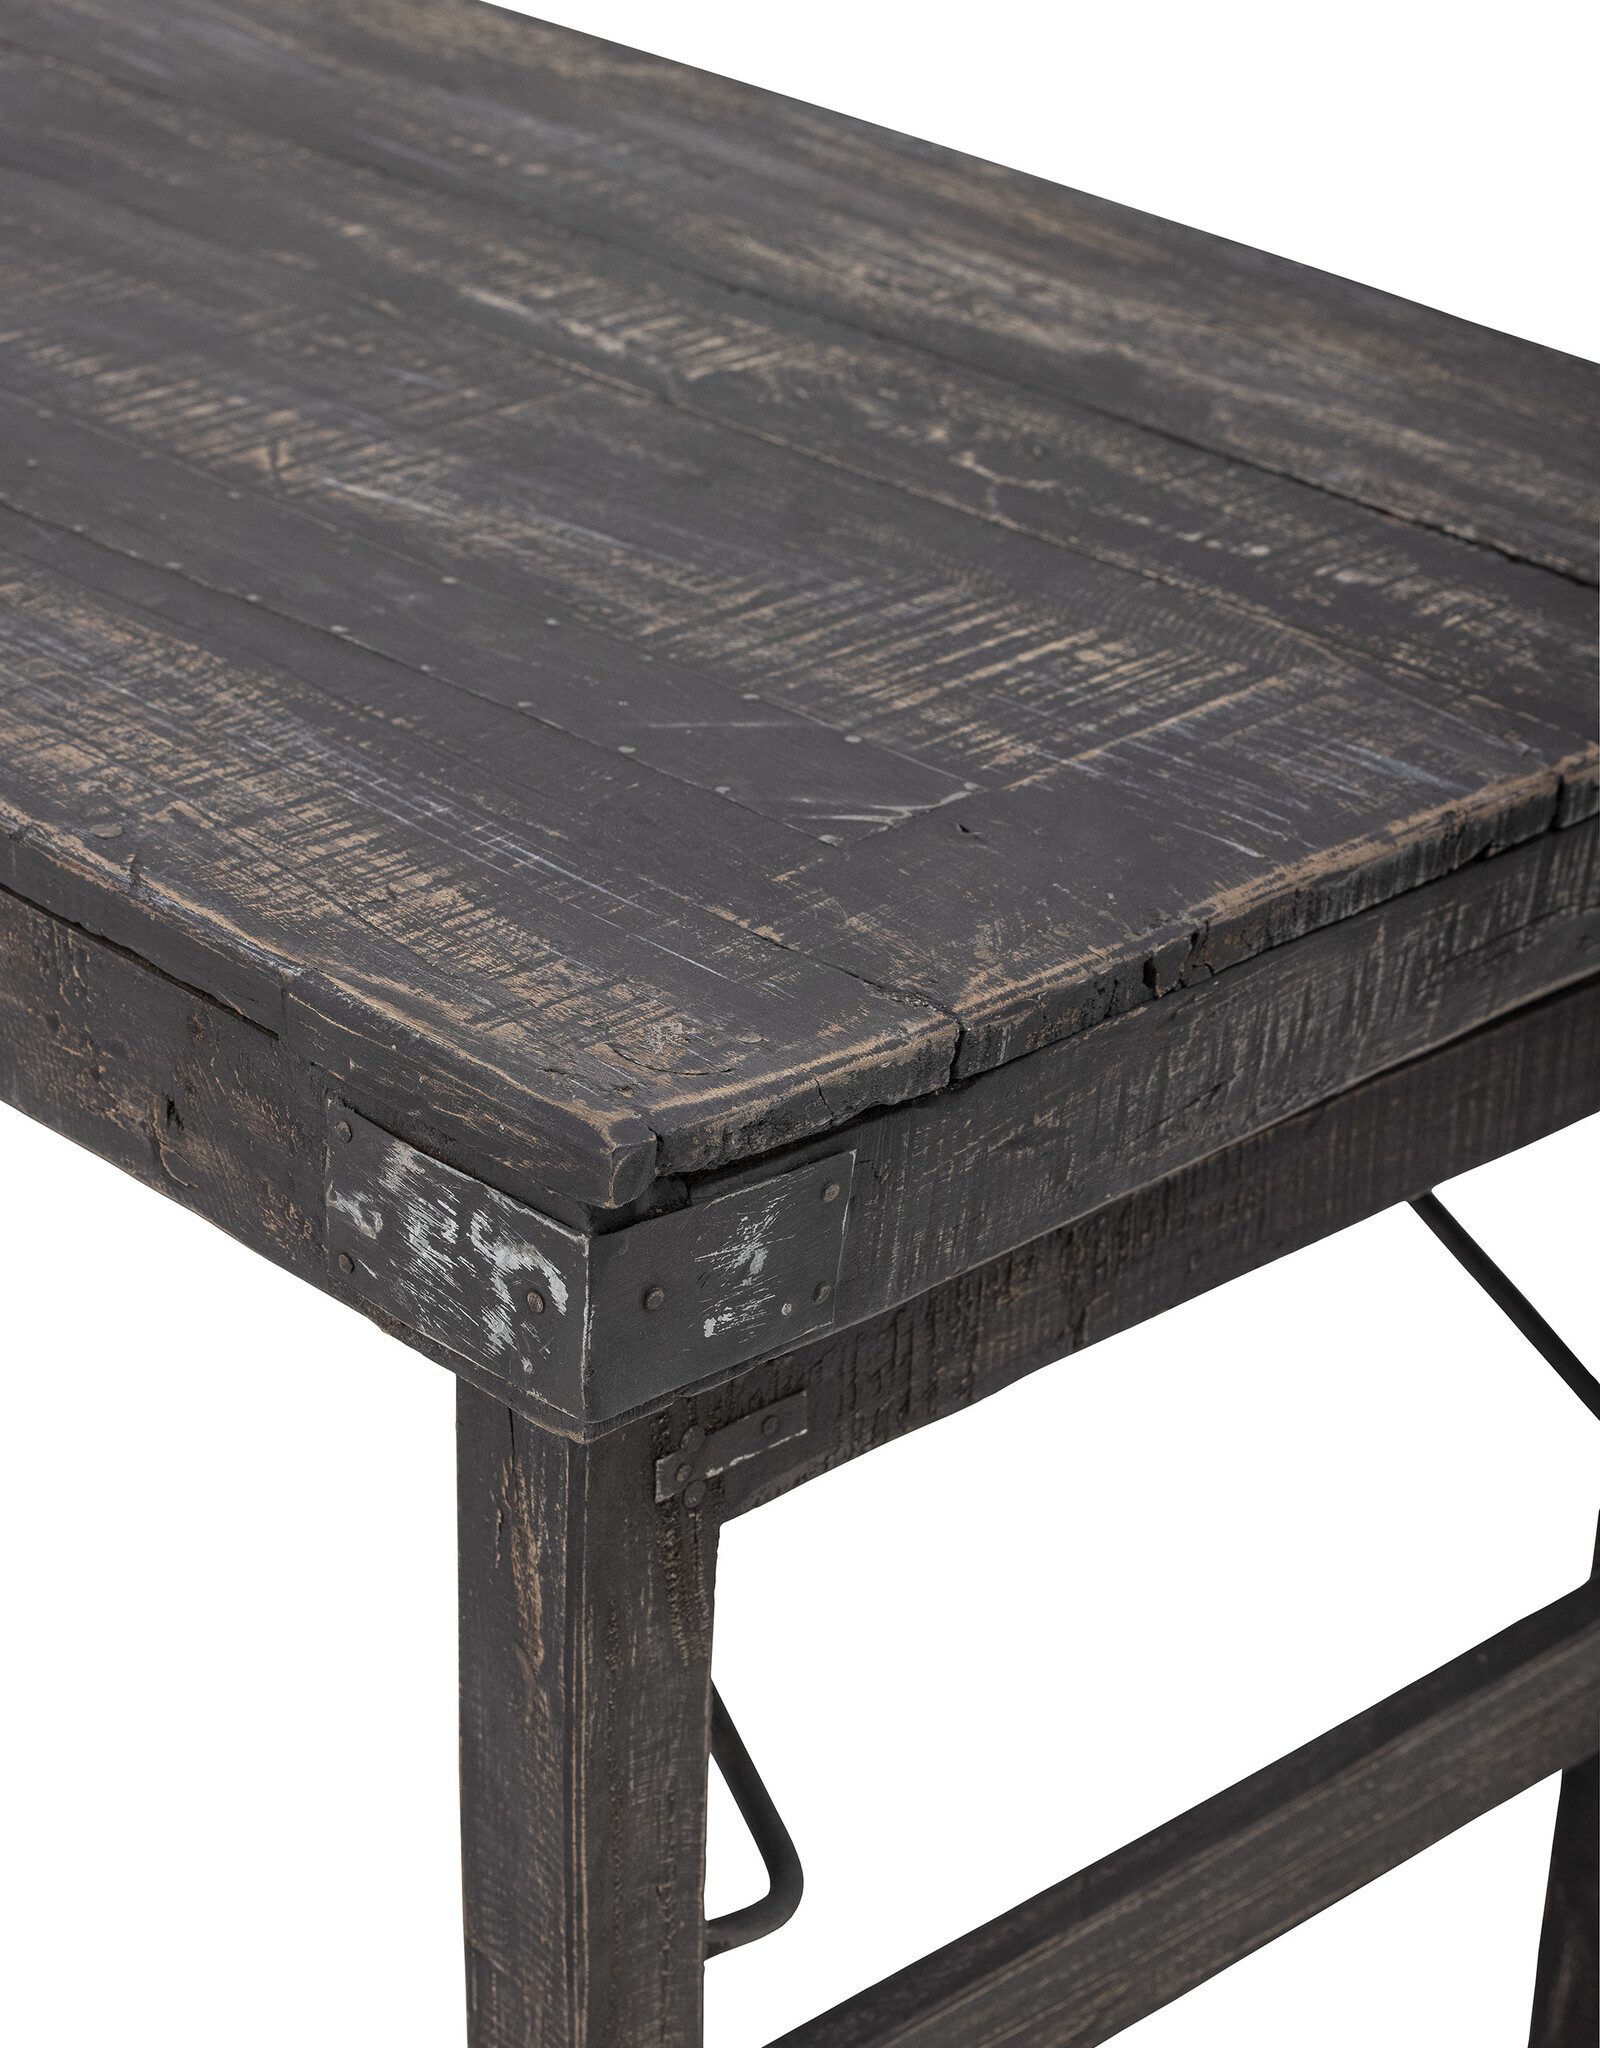 Creative Collection markttafel 'Cali' - recycled hout